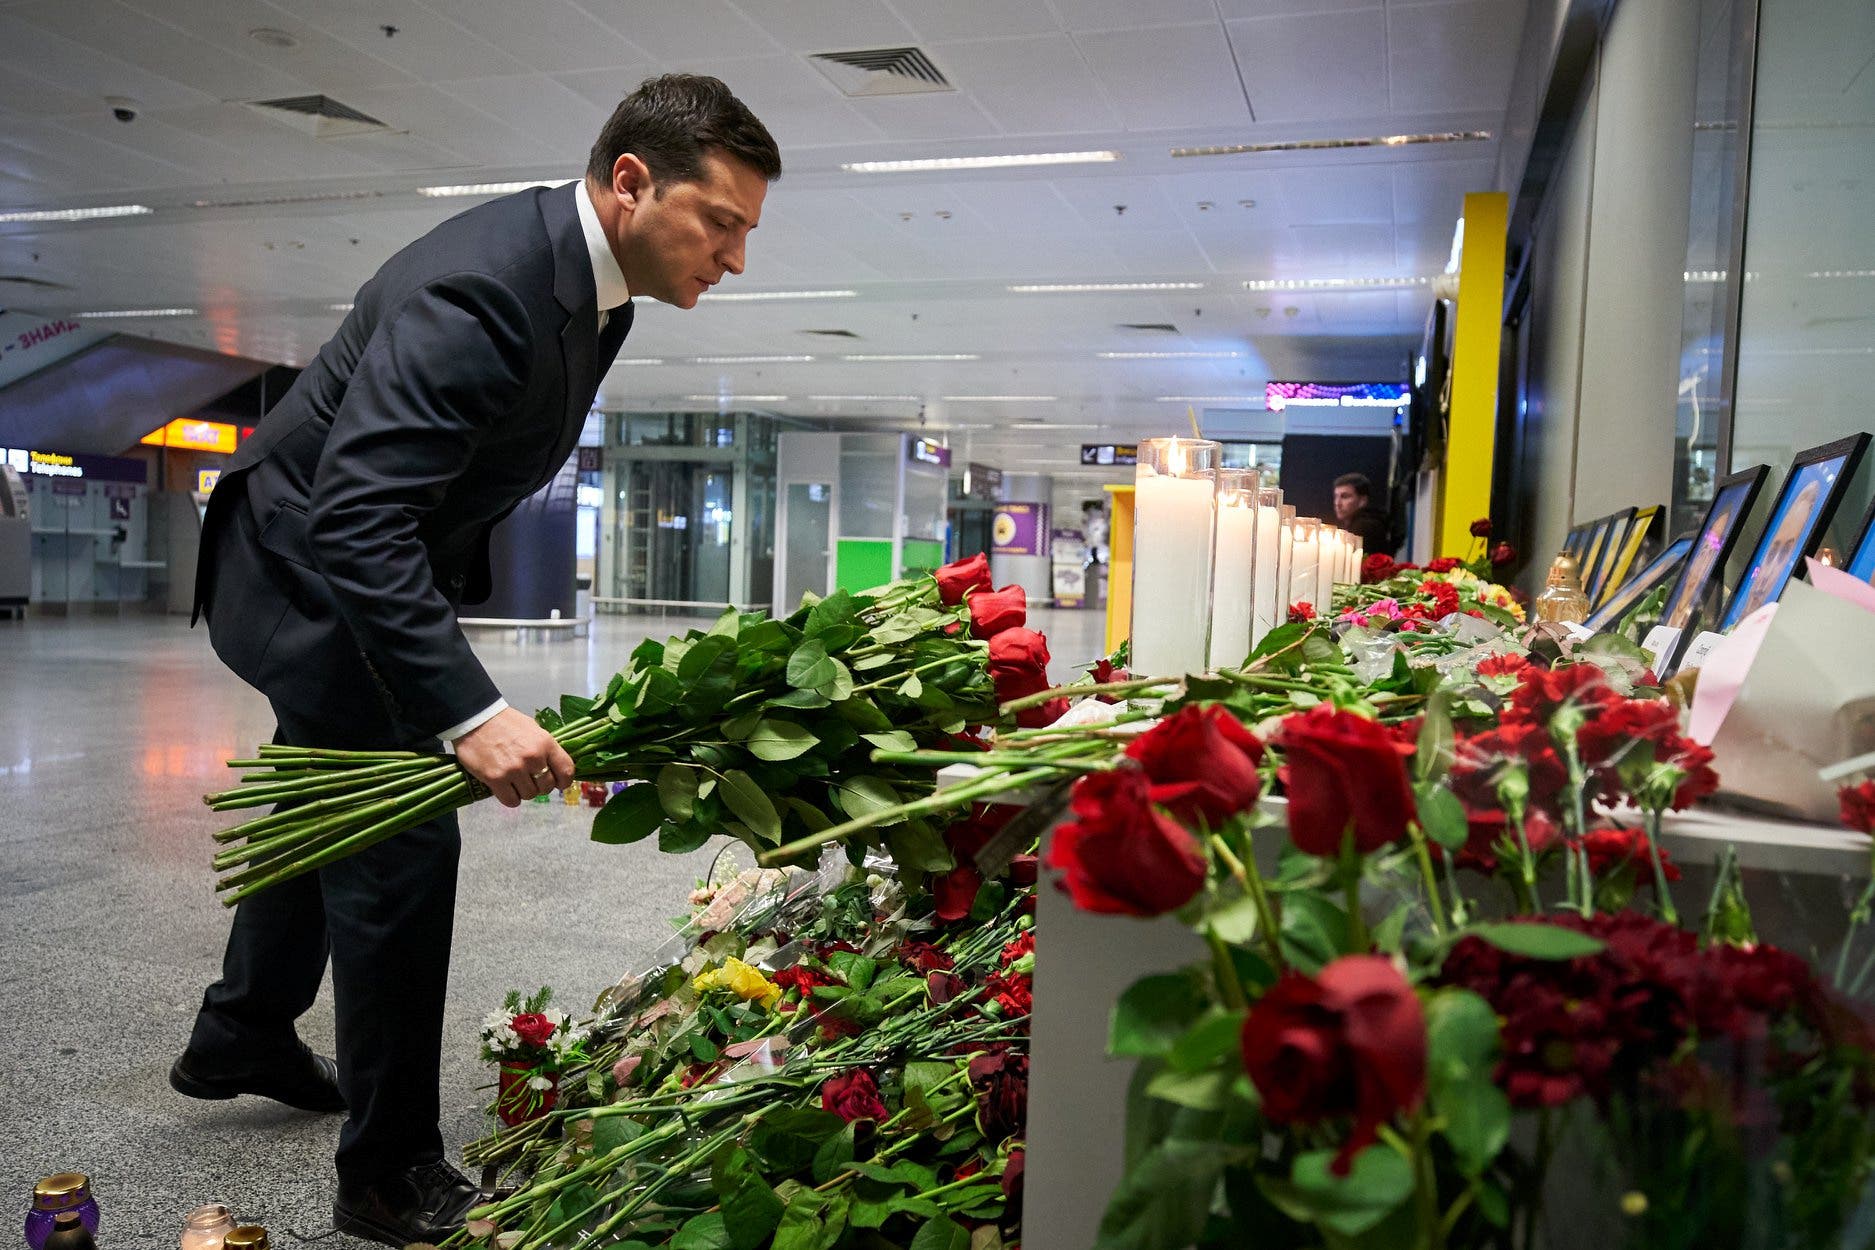 Ukrainian President Volodymyr Zelenskiy lays flowers to commemorate victims of the Ukraine International Airlines Boeing 737-800 plane crash, at a memorial in Boryspil International airport outside Kiev, Ukraine, on January 9, 2020. (Reuters)